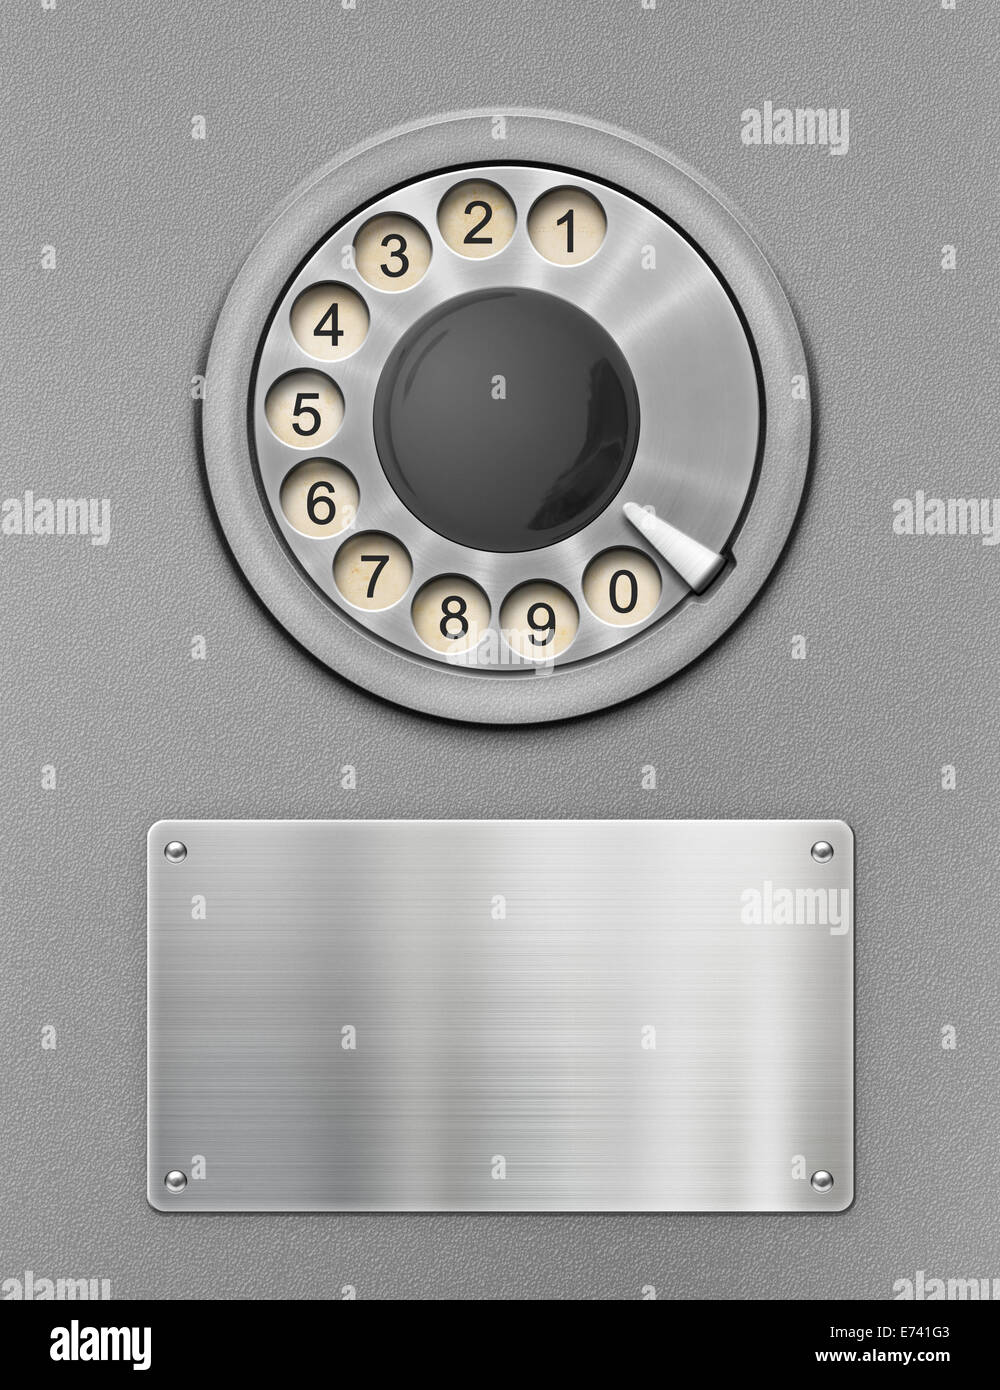 Retro public phone rotary dial and metal plate Stock Photo